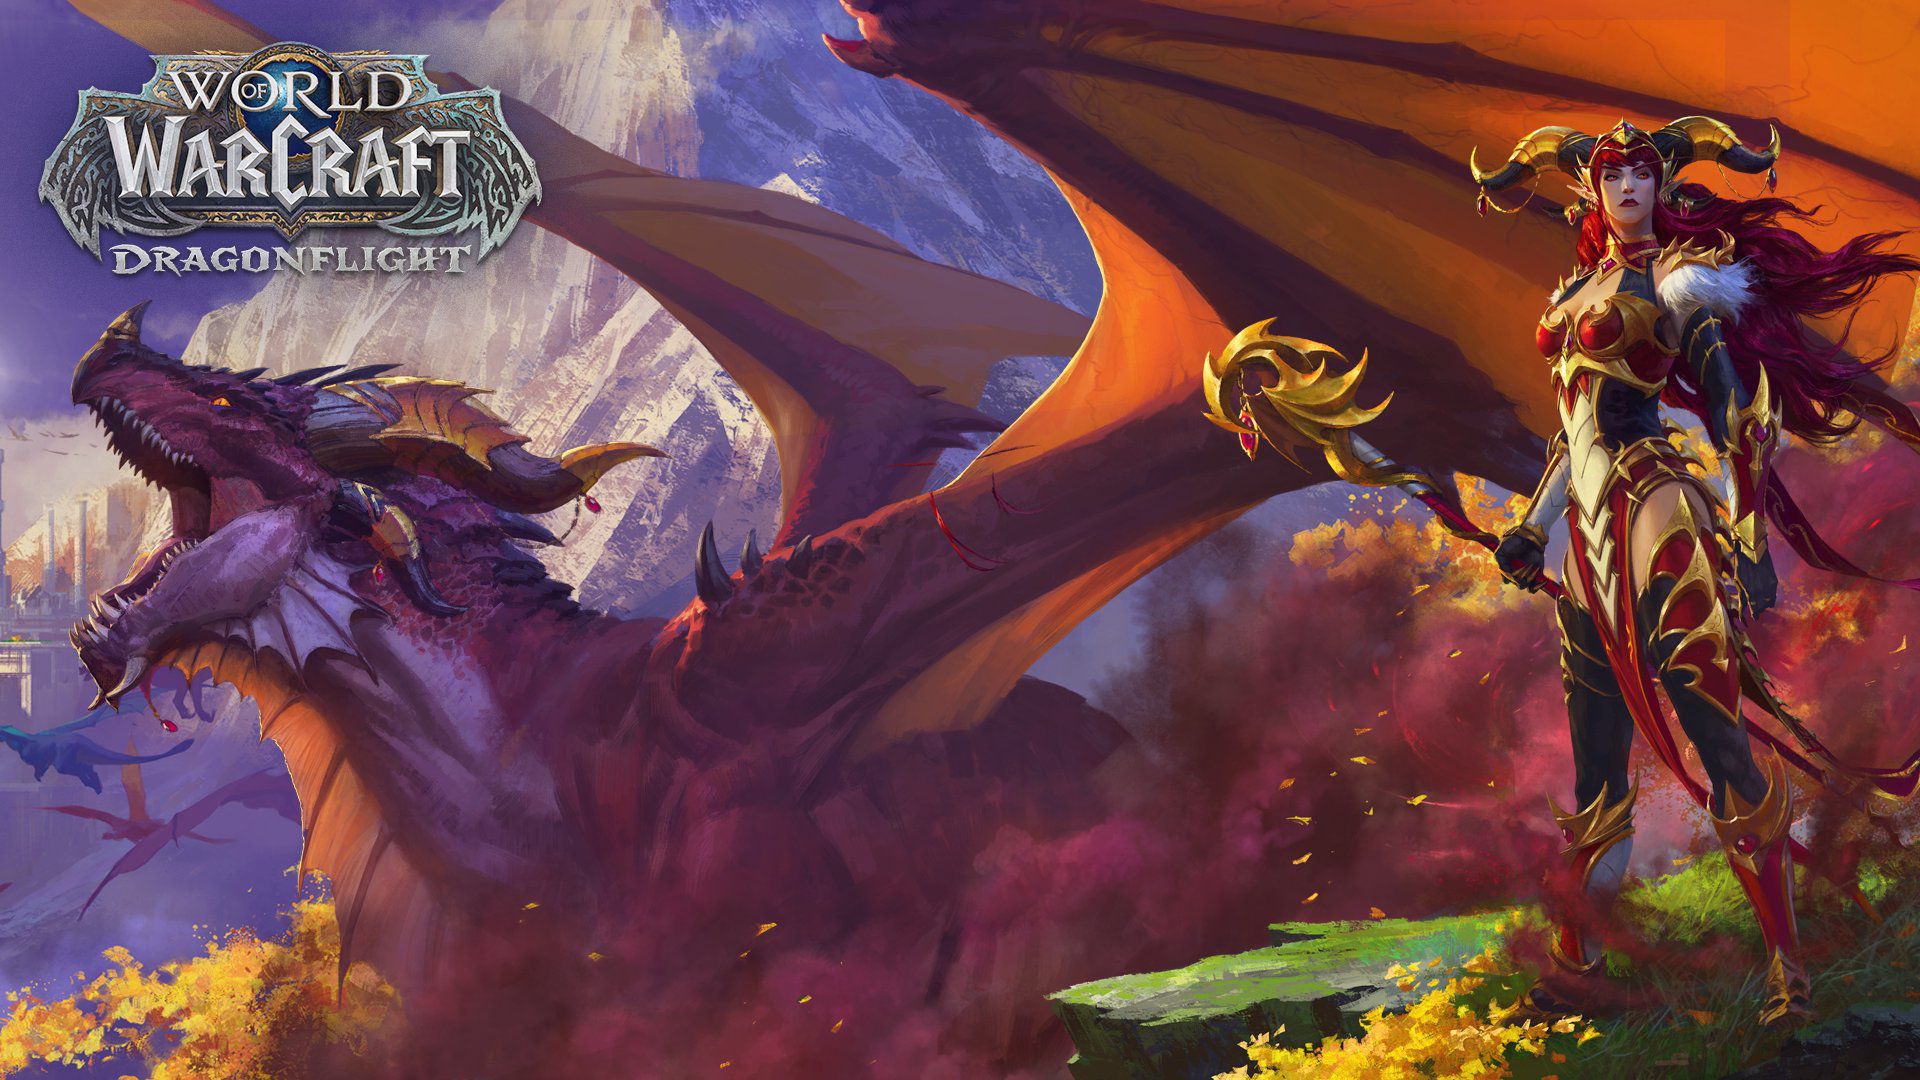 World of Warcraft: Dragonflight confirms its arrival date